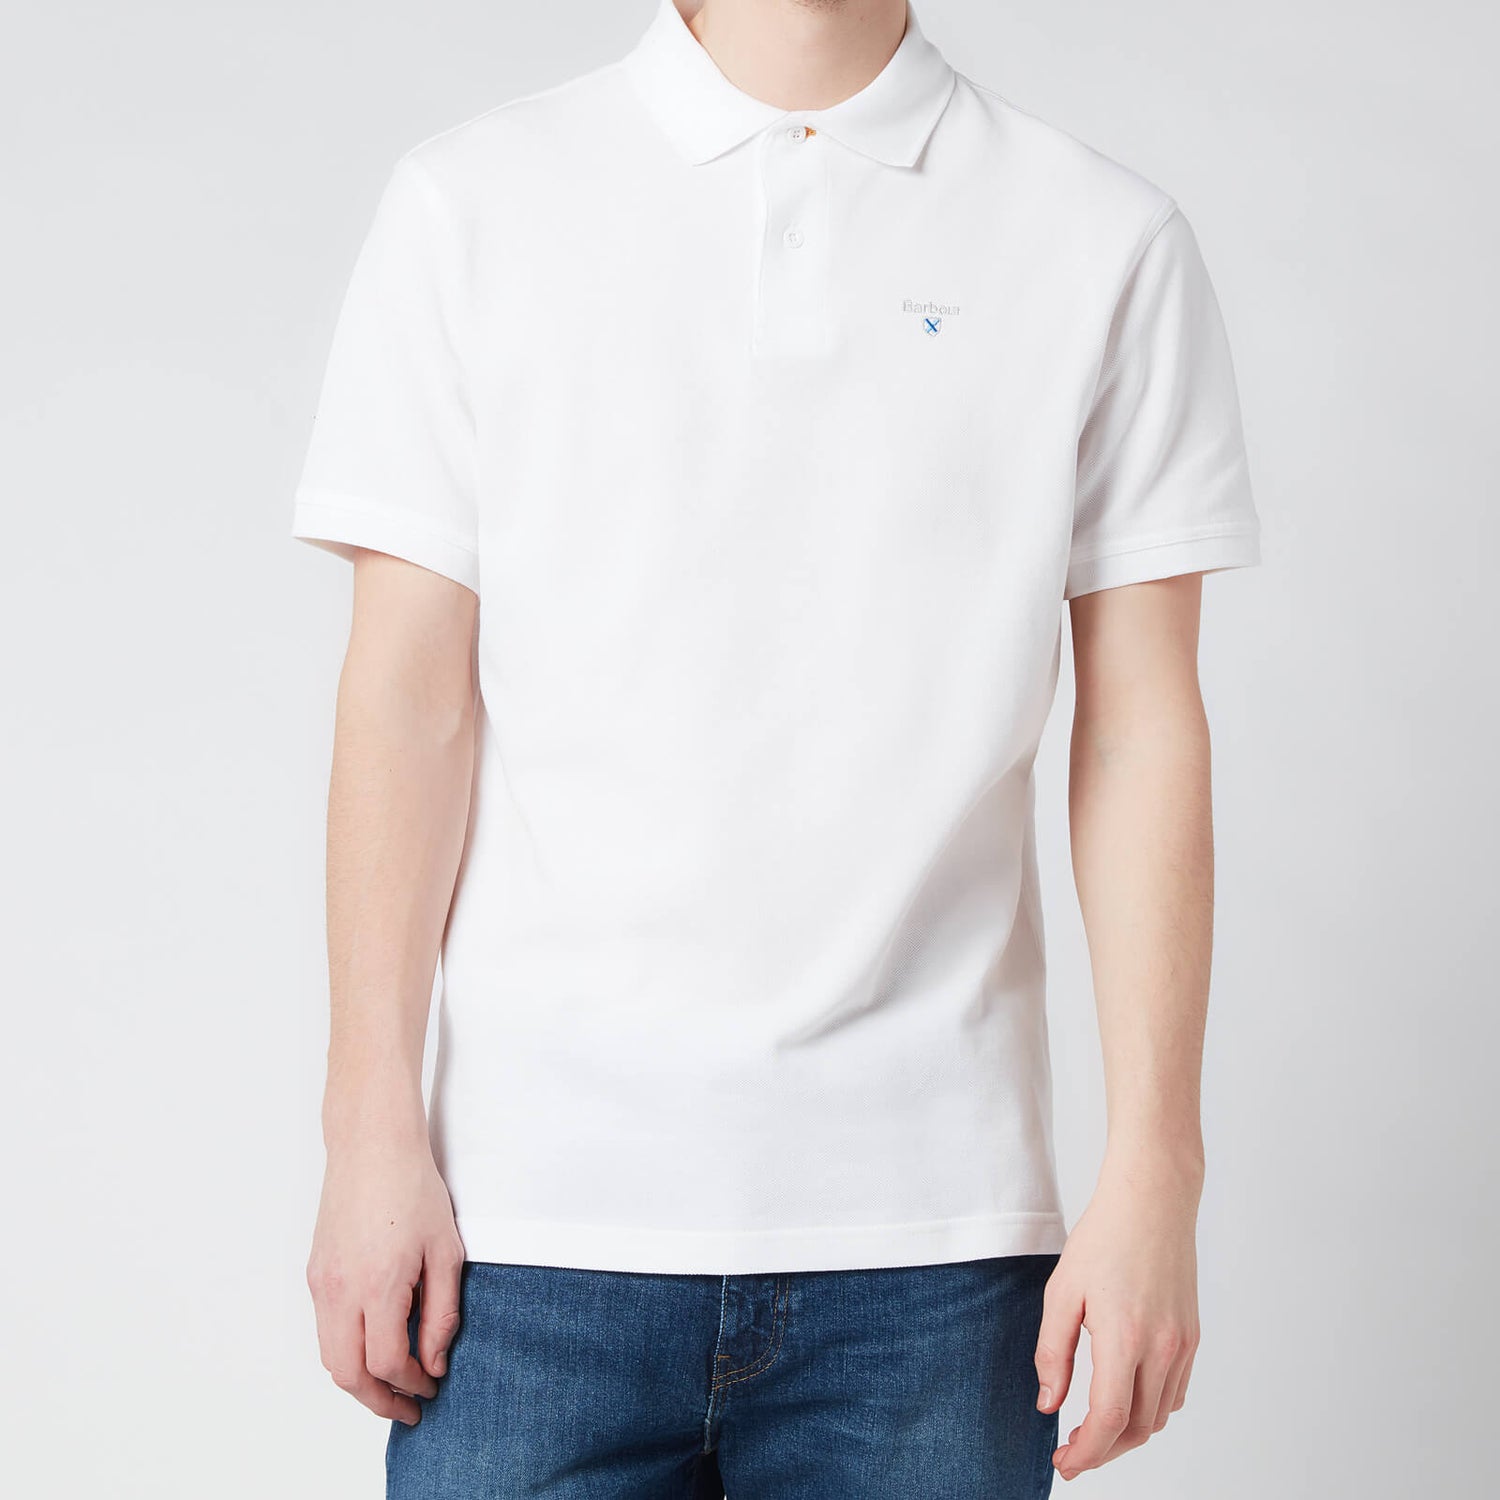 Barbour Heritage Men's Sports Polo Shirt - White - S